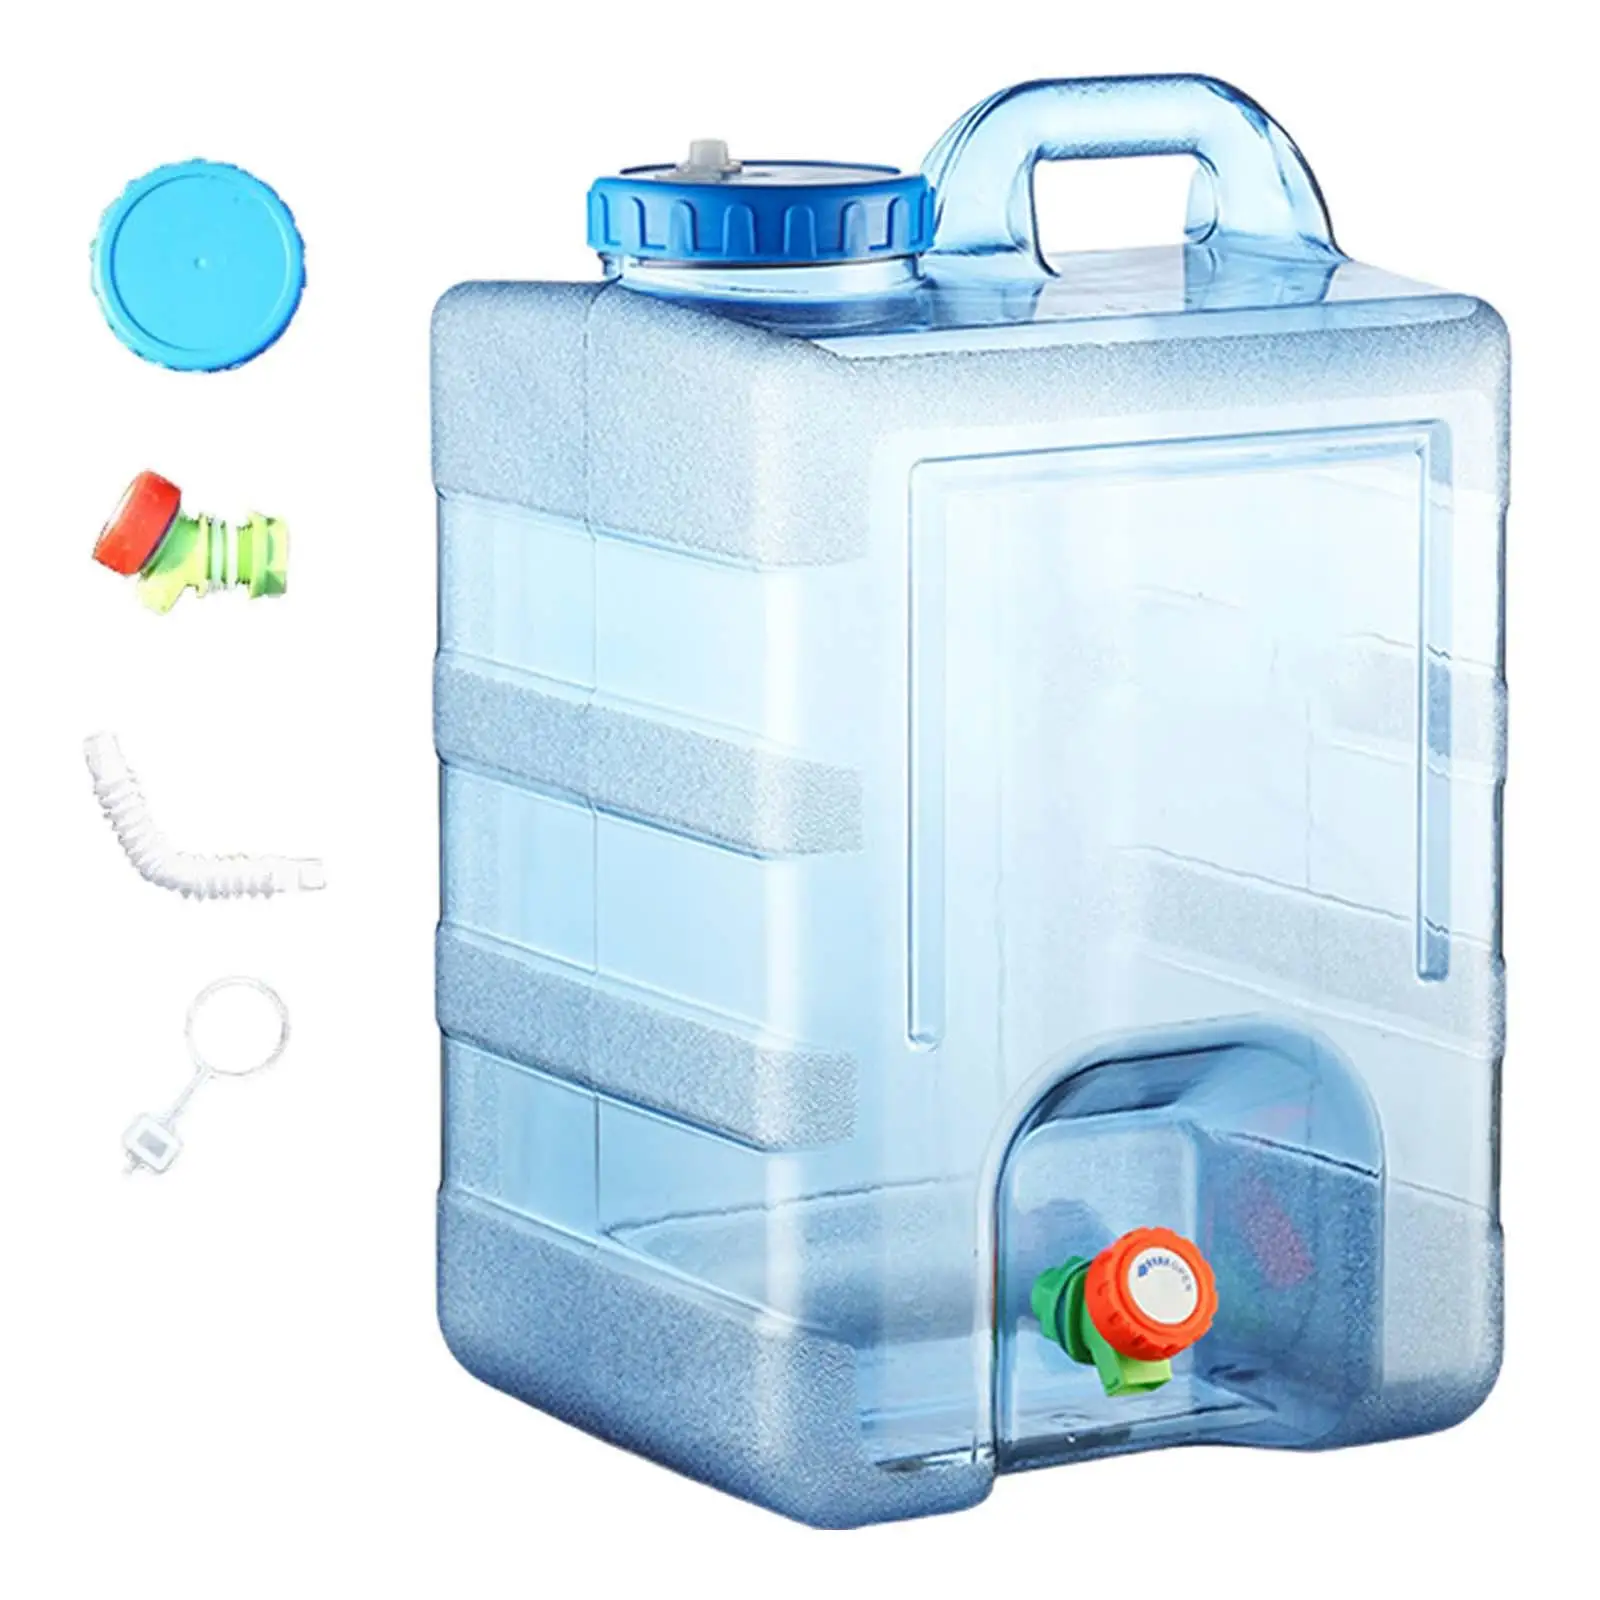 Portable Water Tank Water Storage Container Transparent Blue for Camping